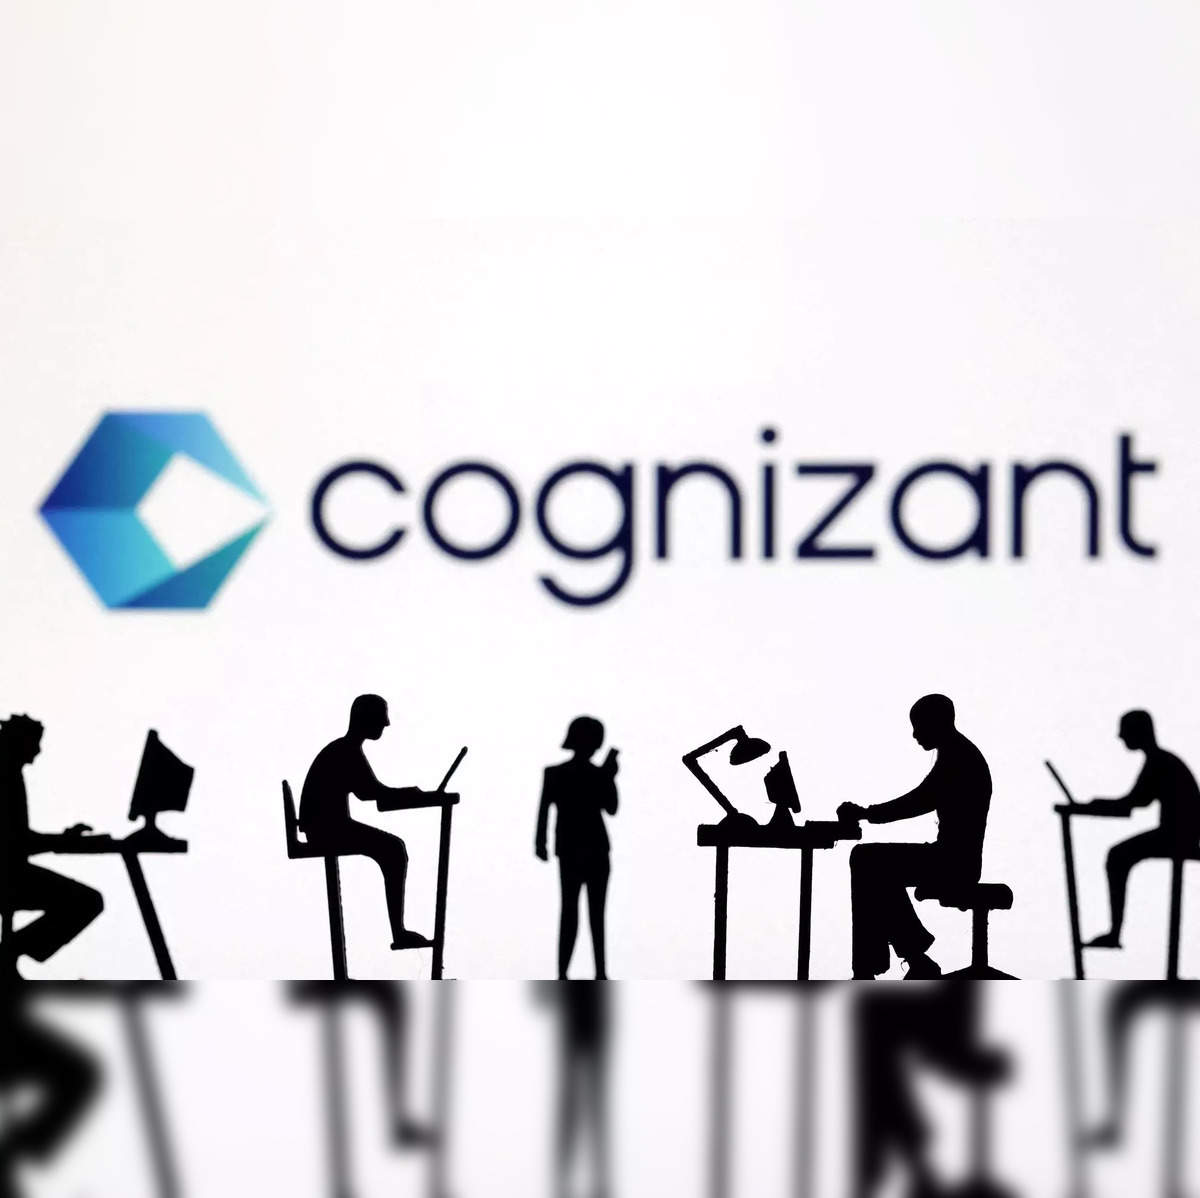 cognizant work from office: Cognizant asks India employees to work from  office thrice a week - The Economic Times